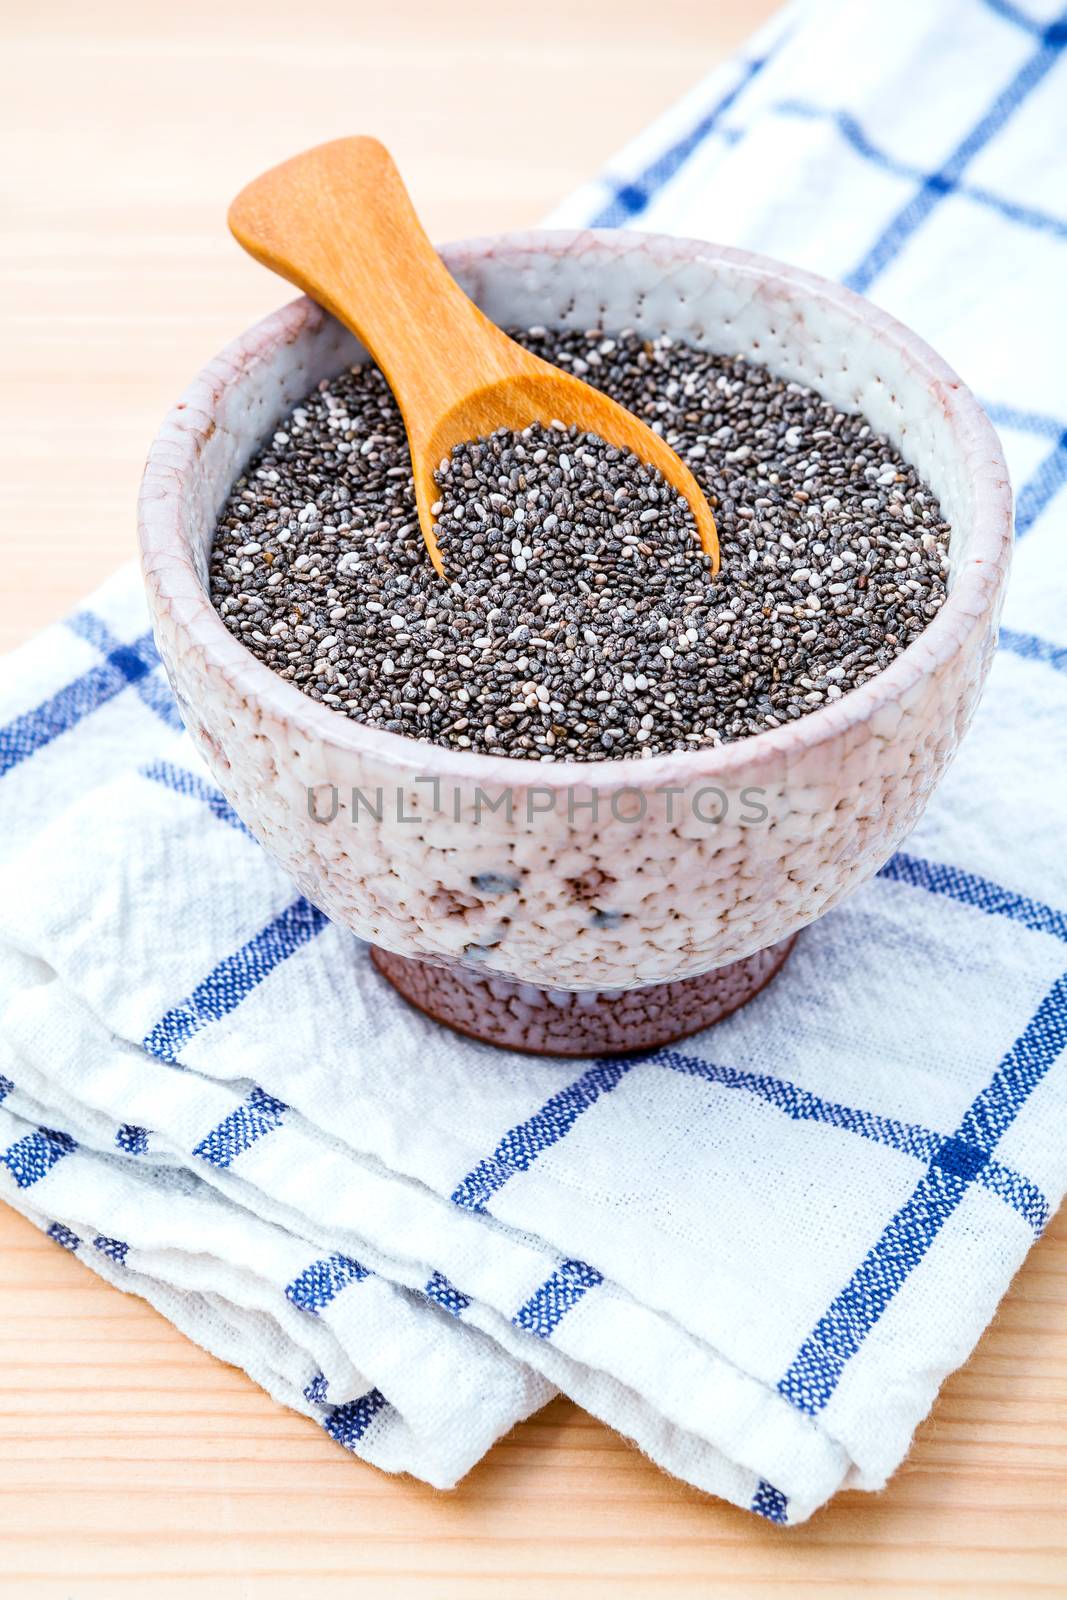 Nutritious chia seeds in ceramic bowl on wooden table for diet f by kerdkanno